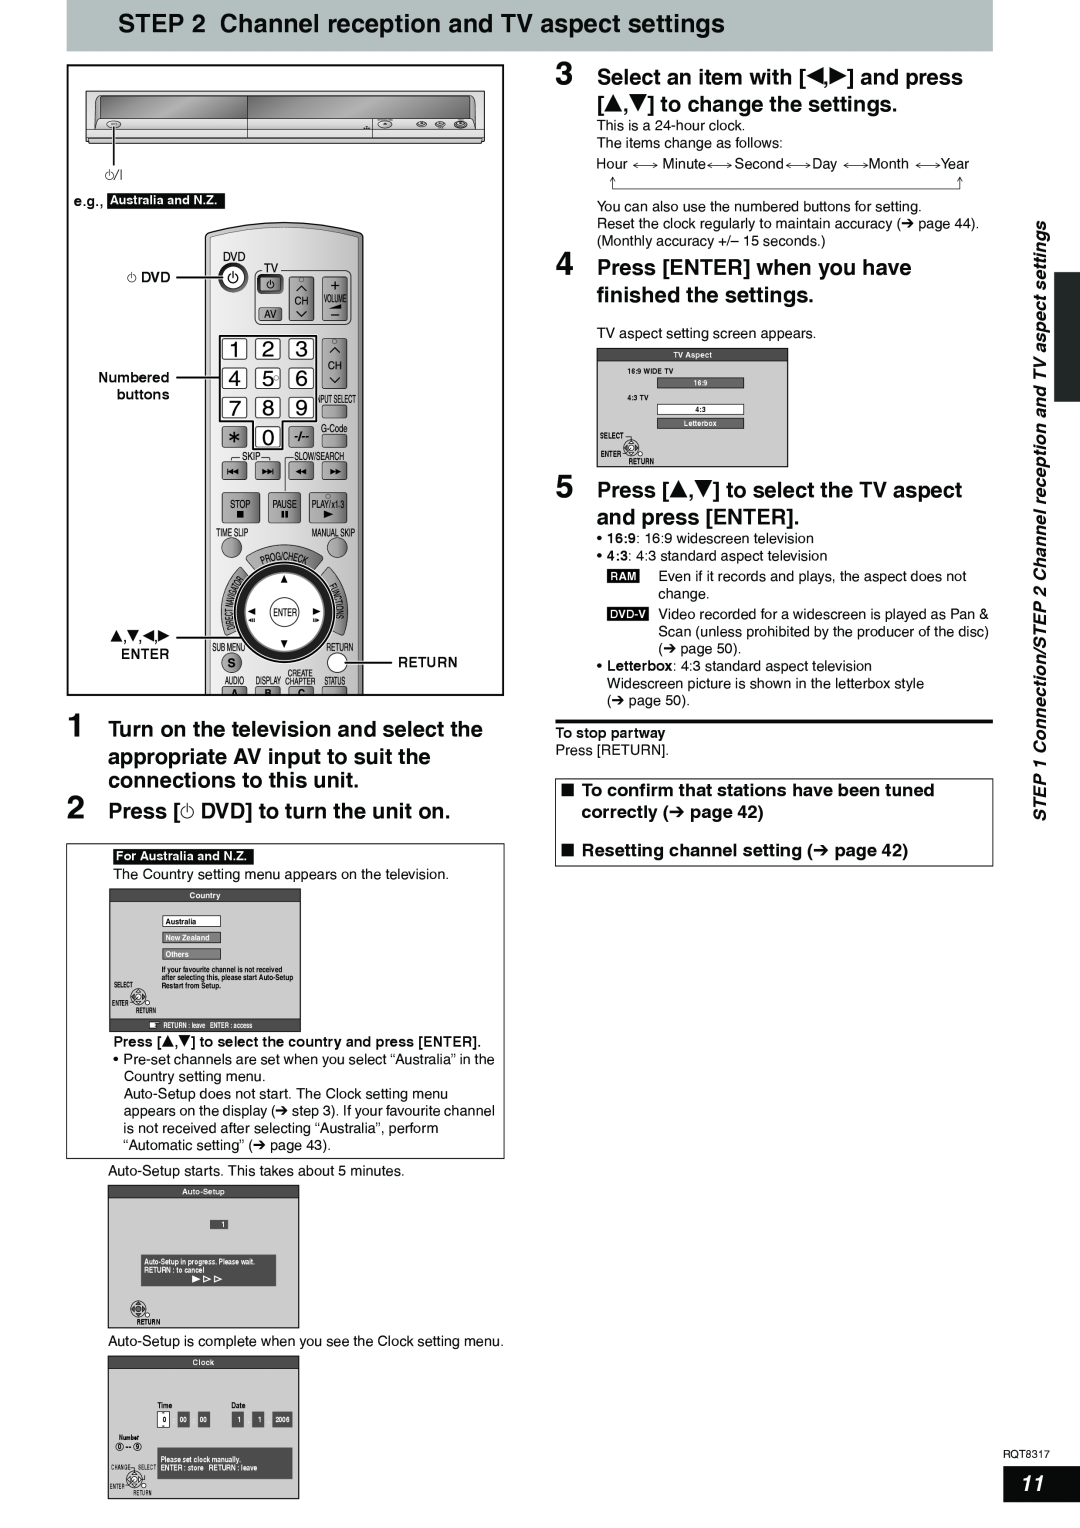 Panasonic DMR-ES15 Channel reception and TV aspect settings, Select an item with w,q and press, e,r to change the settings 